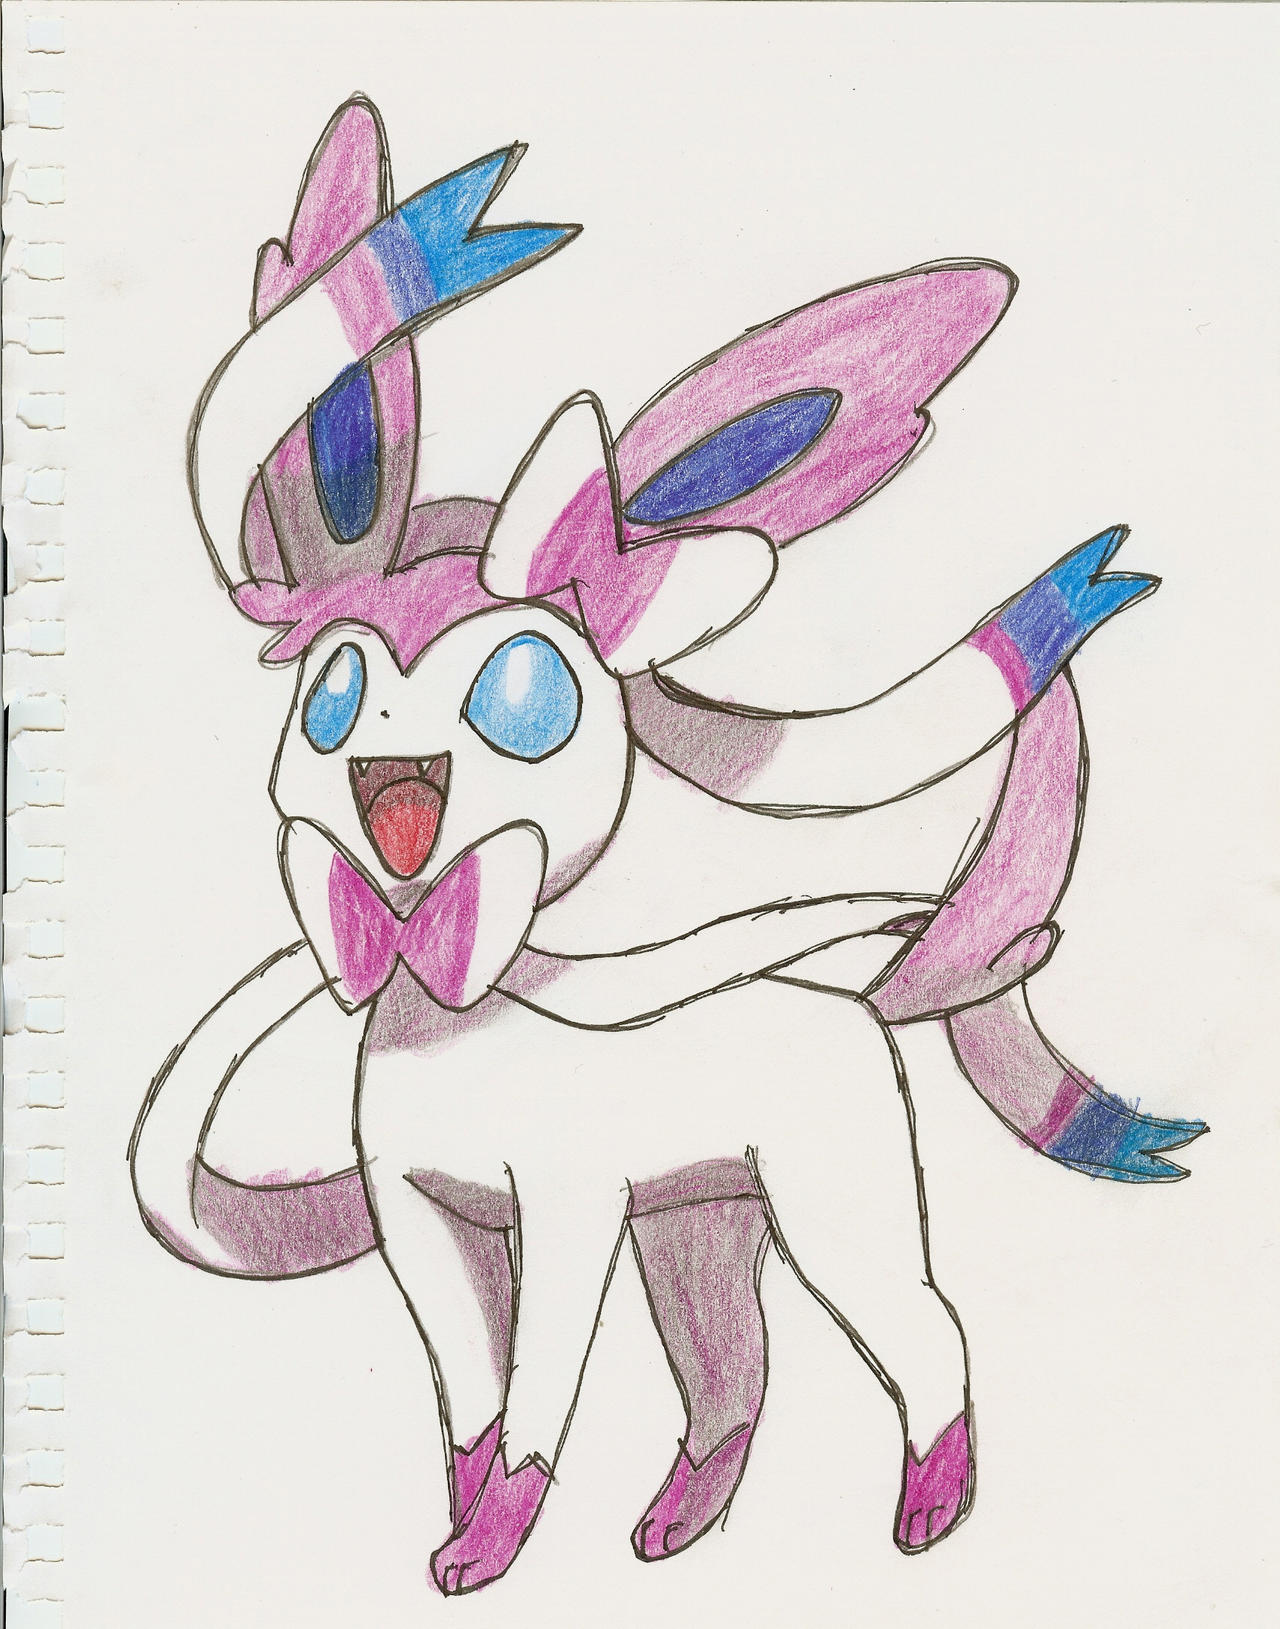 Creative Sylveon Drawings Sketch for Kids. 